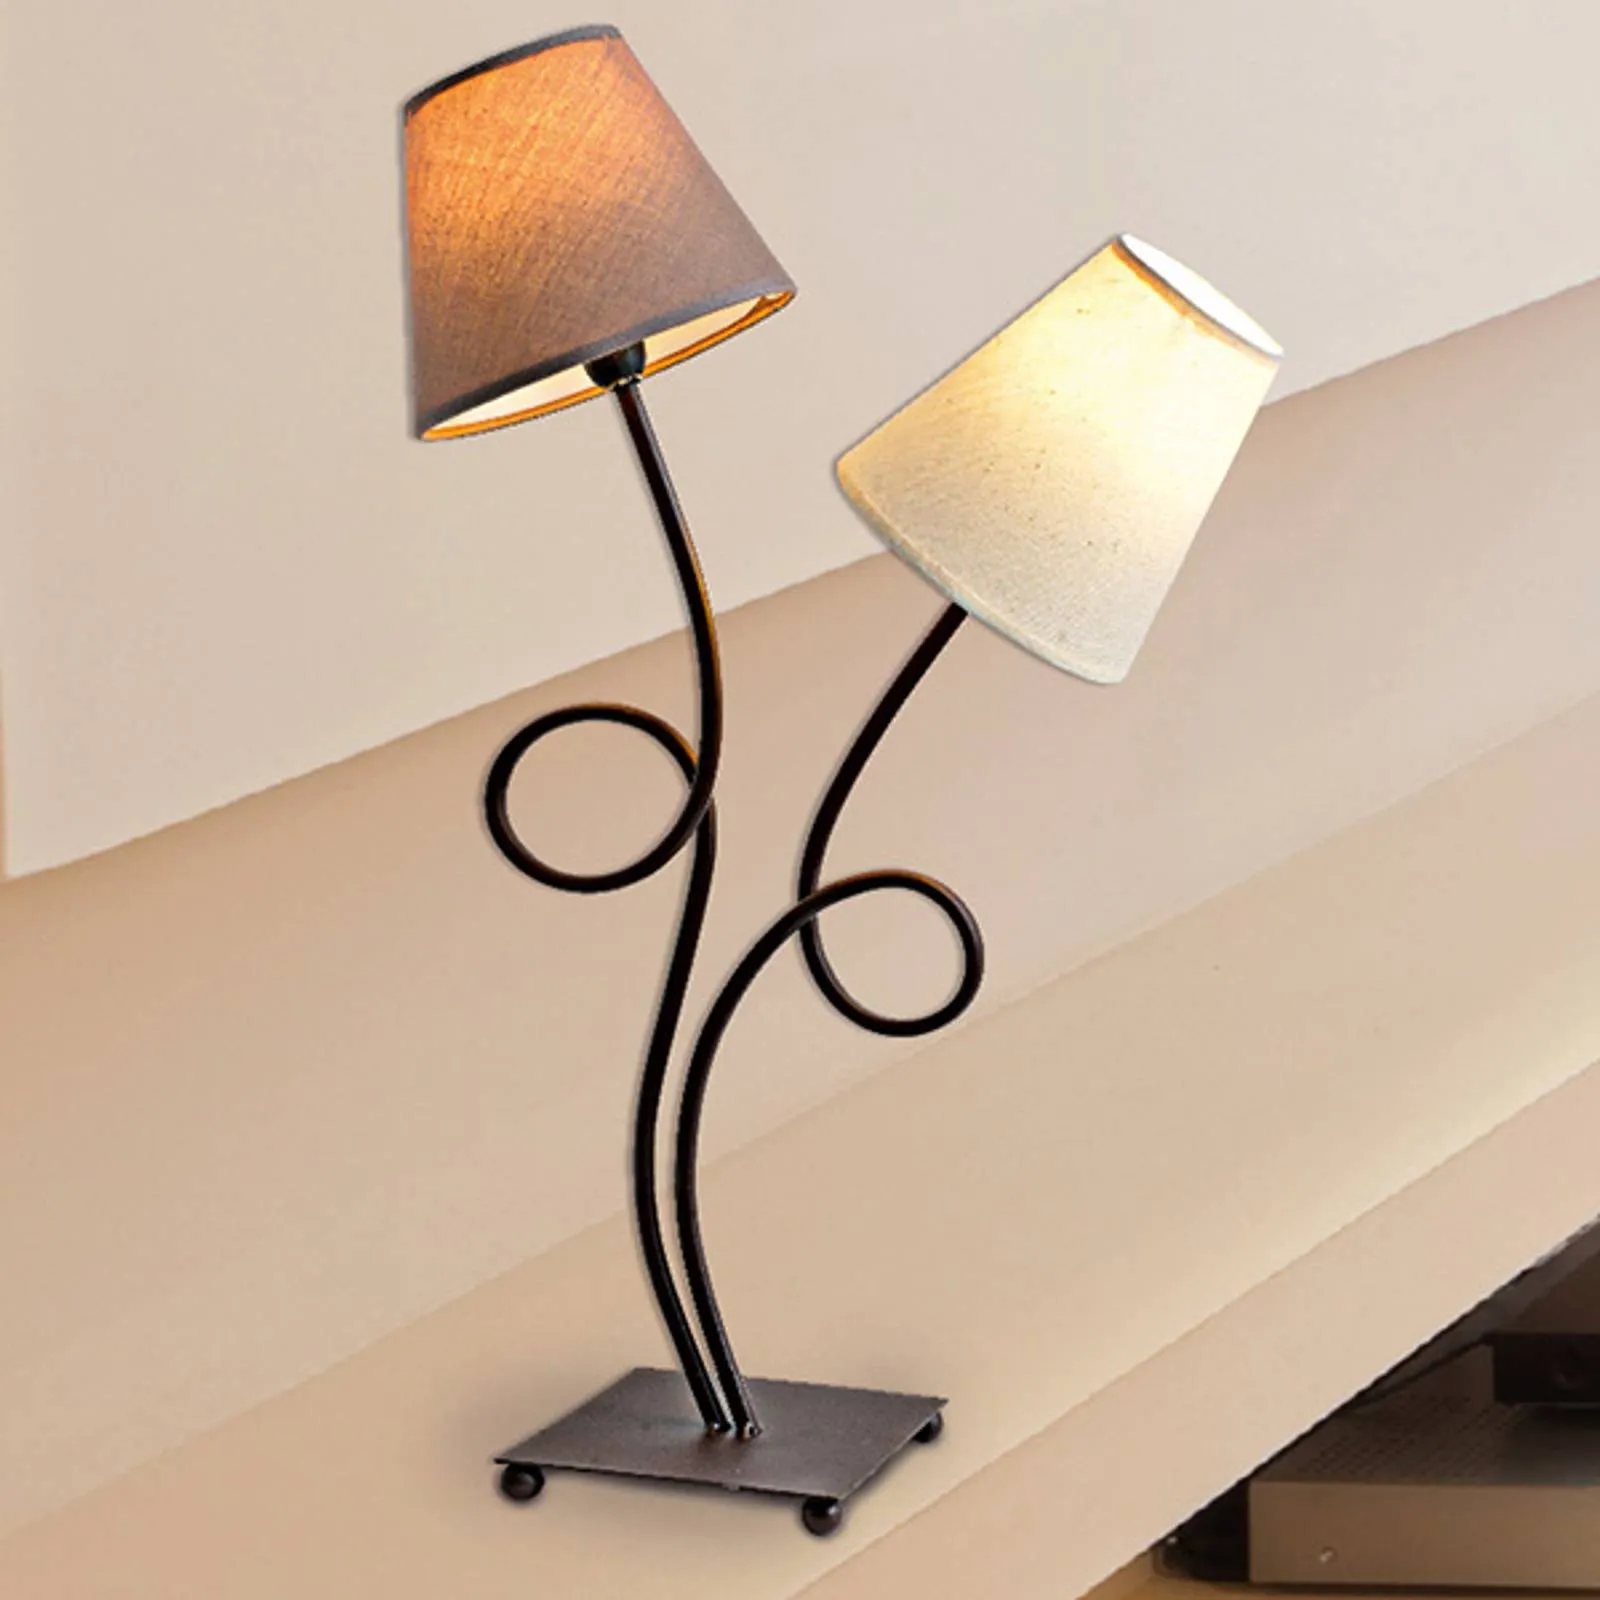 Two-bulb fabric table lamp Twiddle